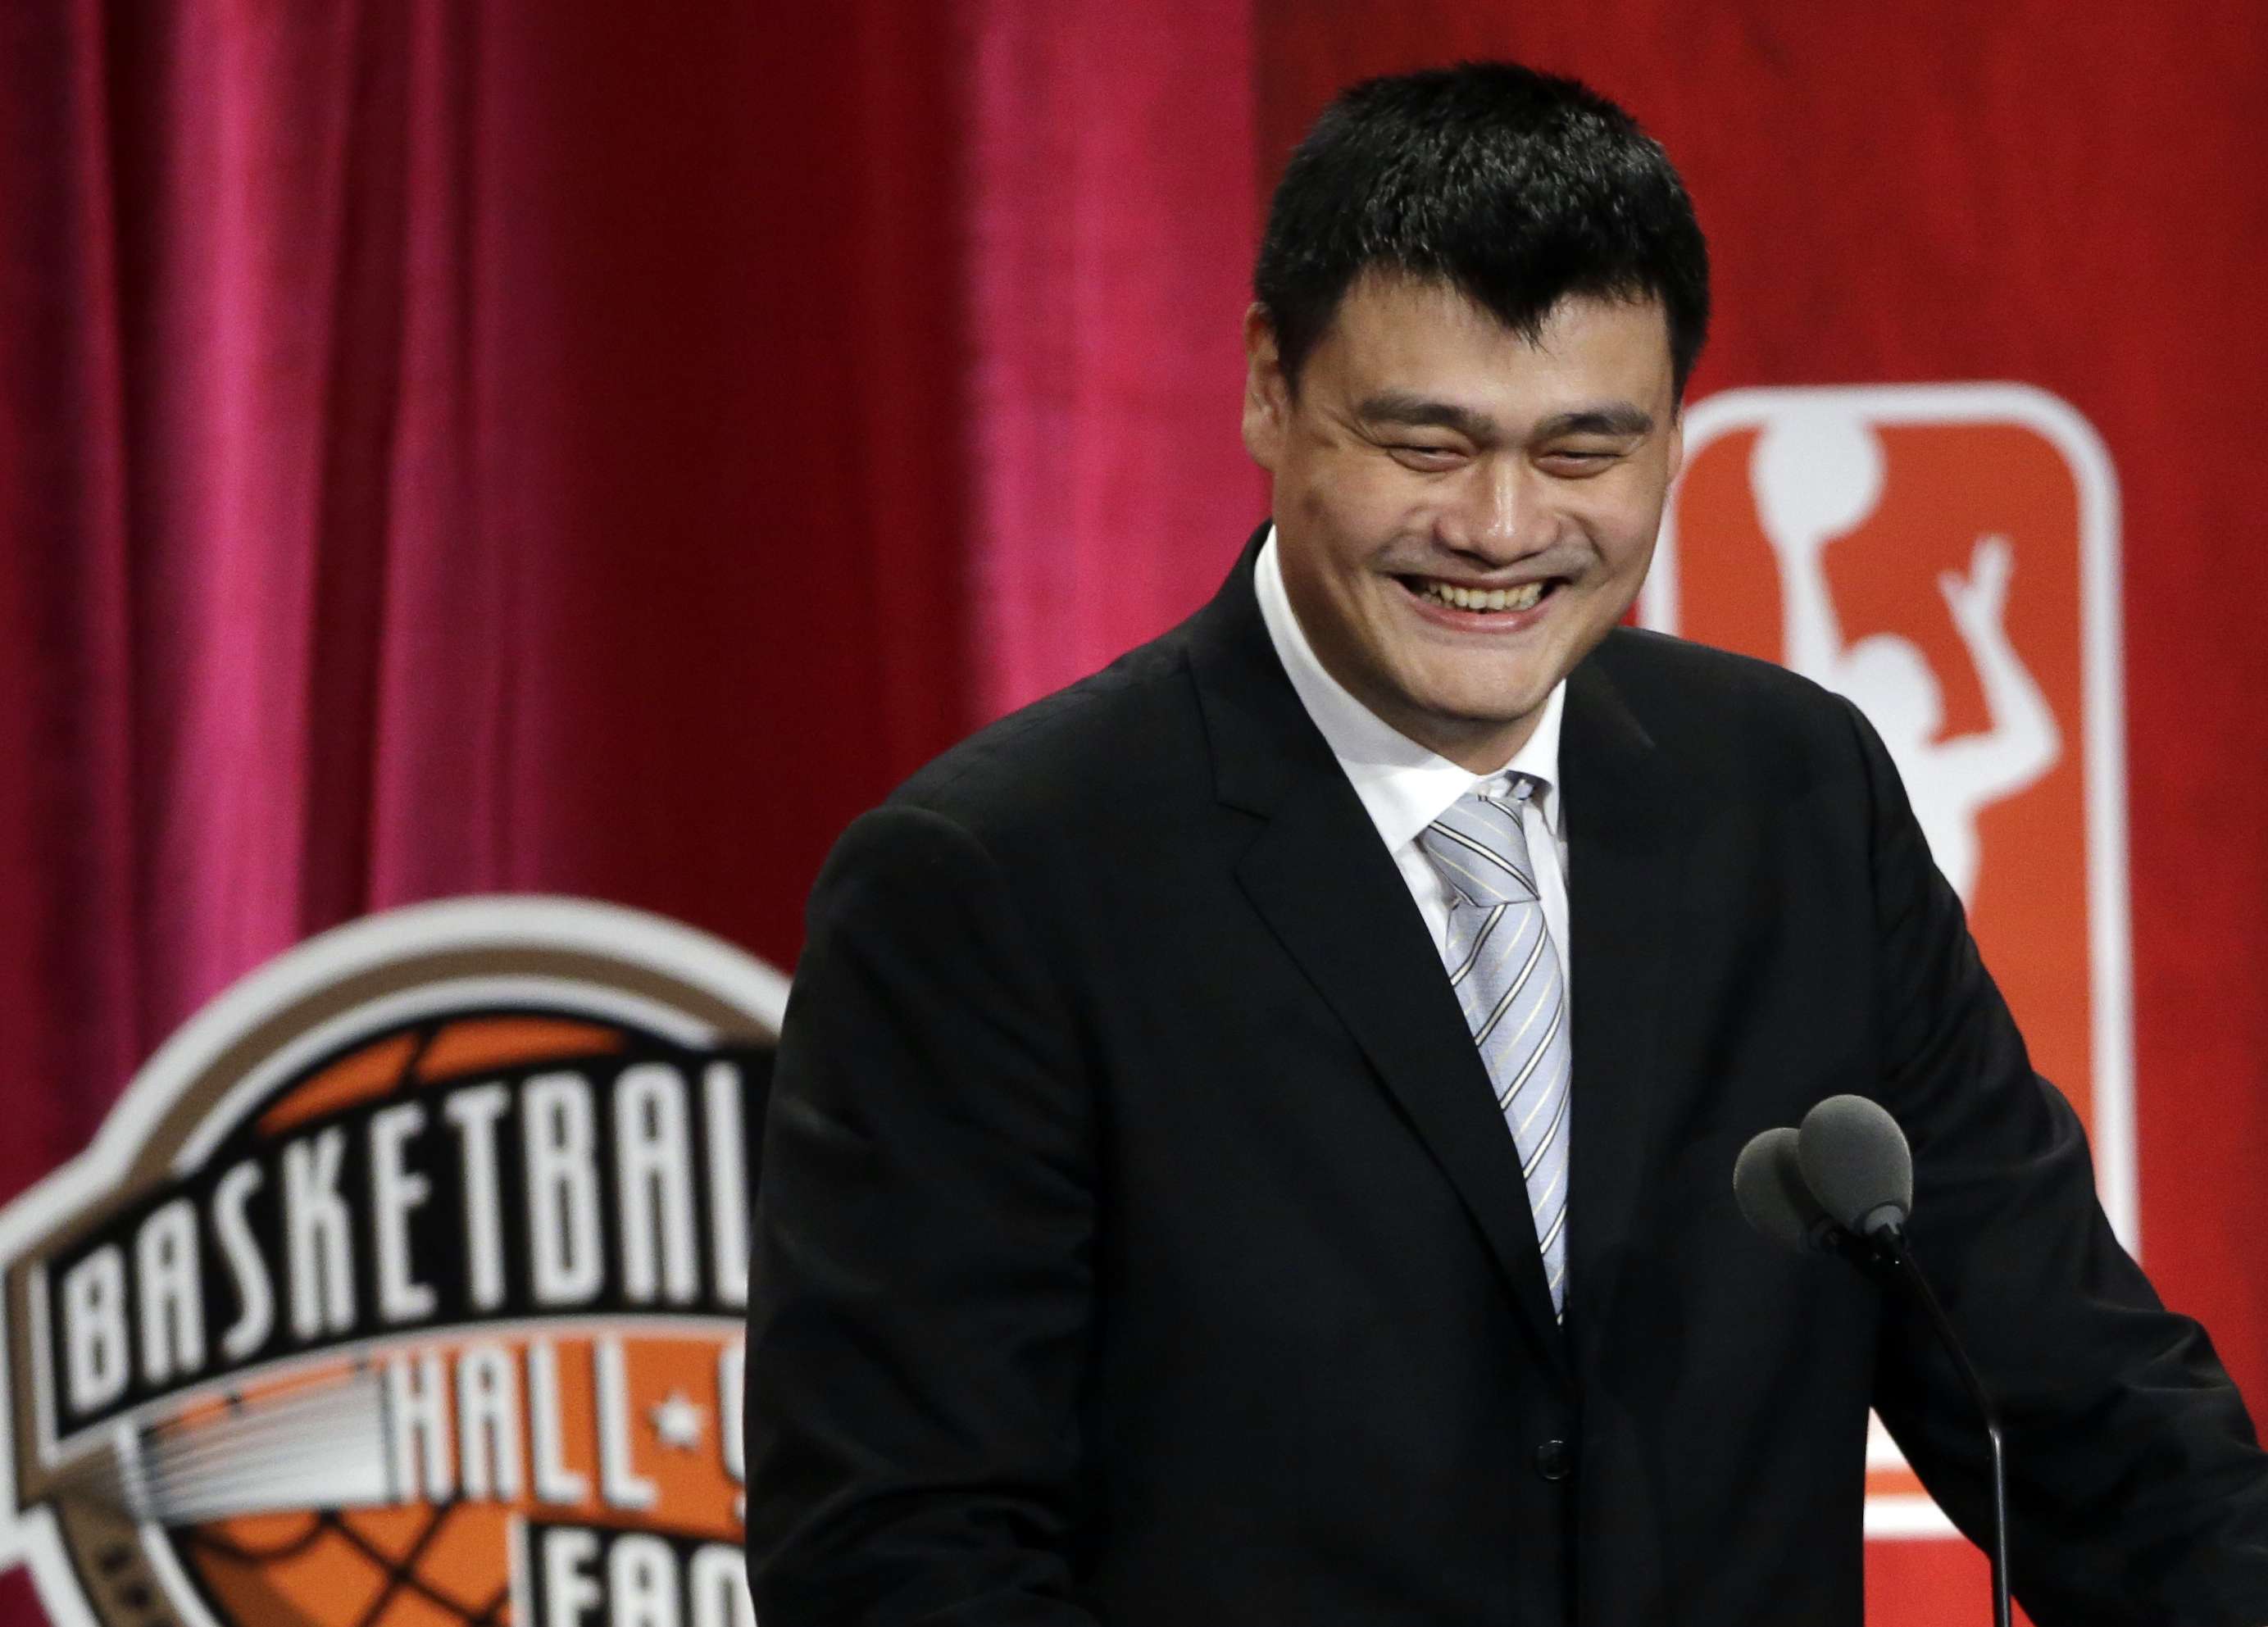 SEE IT: Houston Rockets retire Yao Ming's jersey during halftime